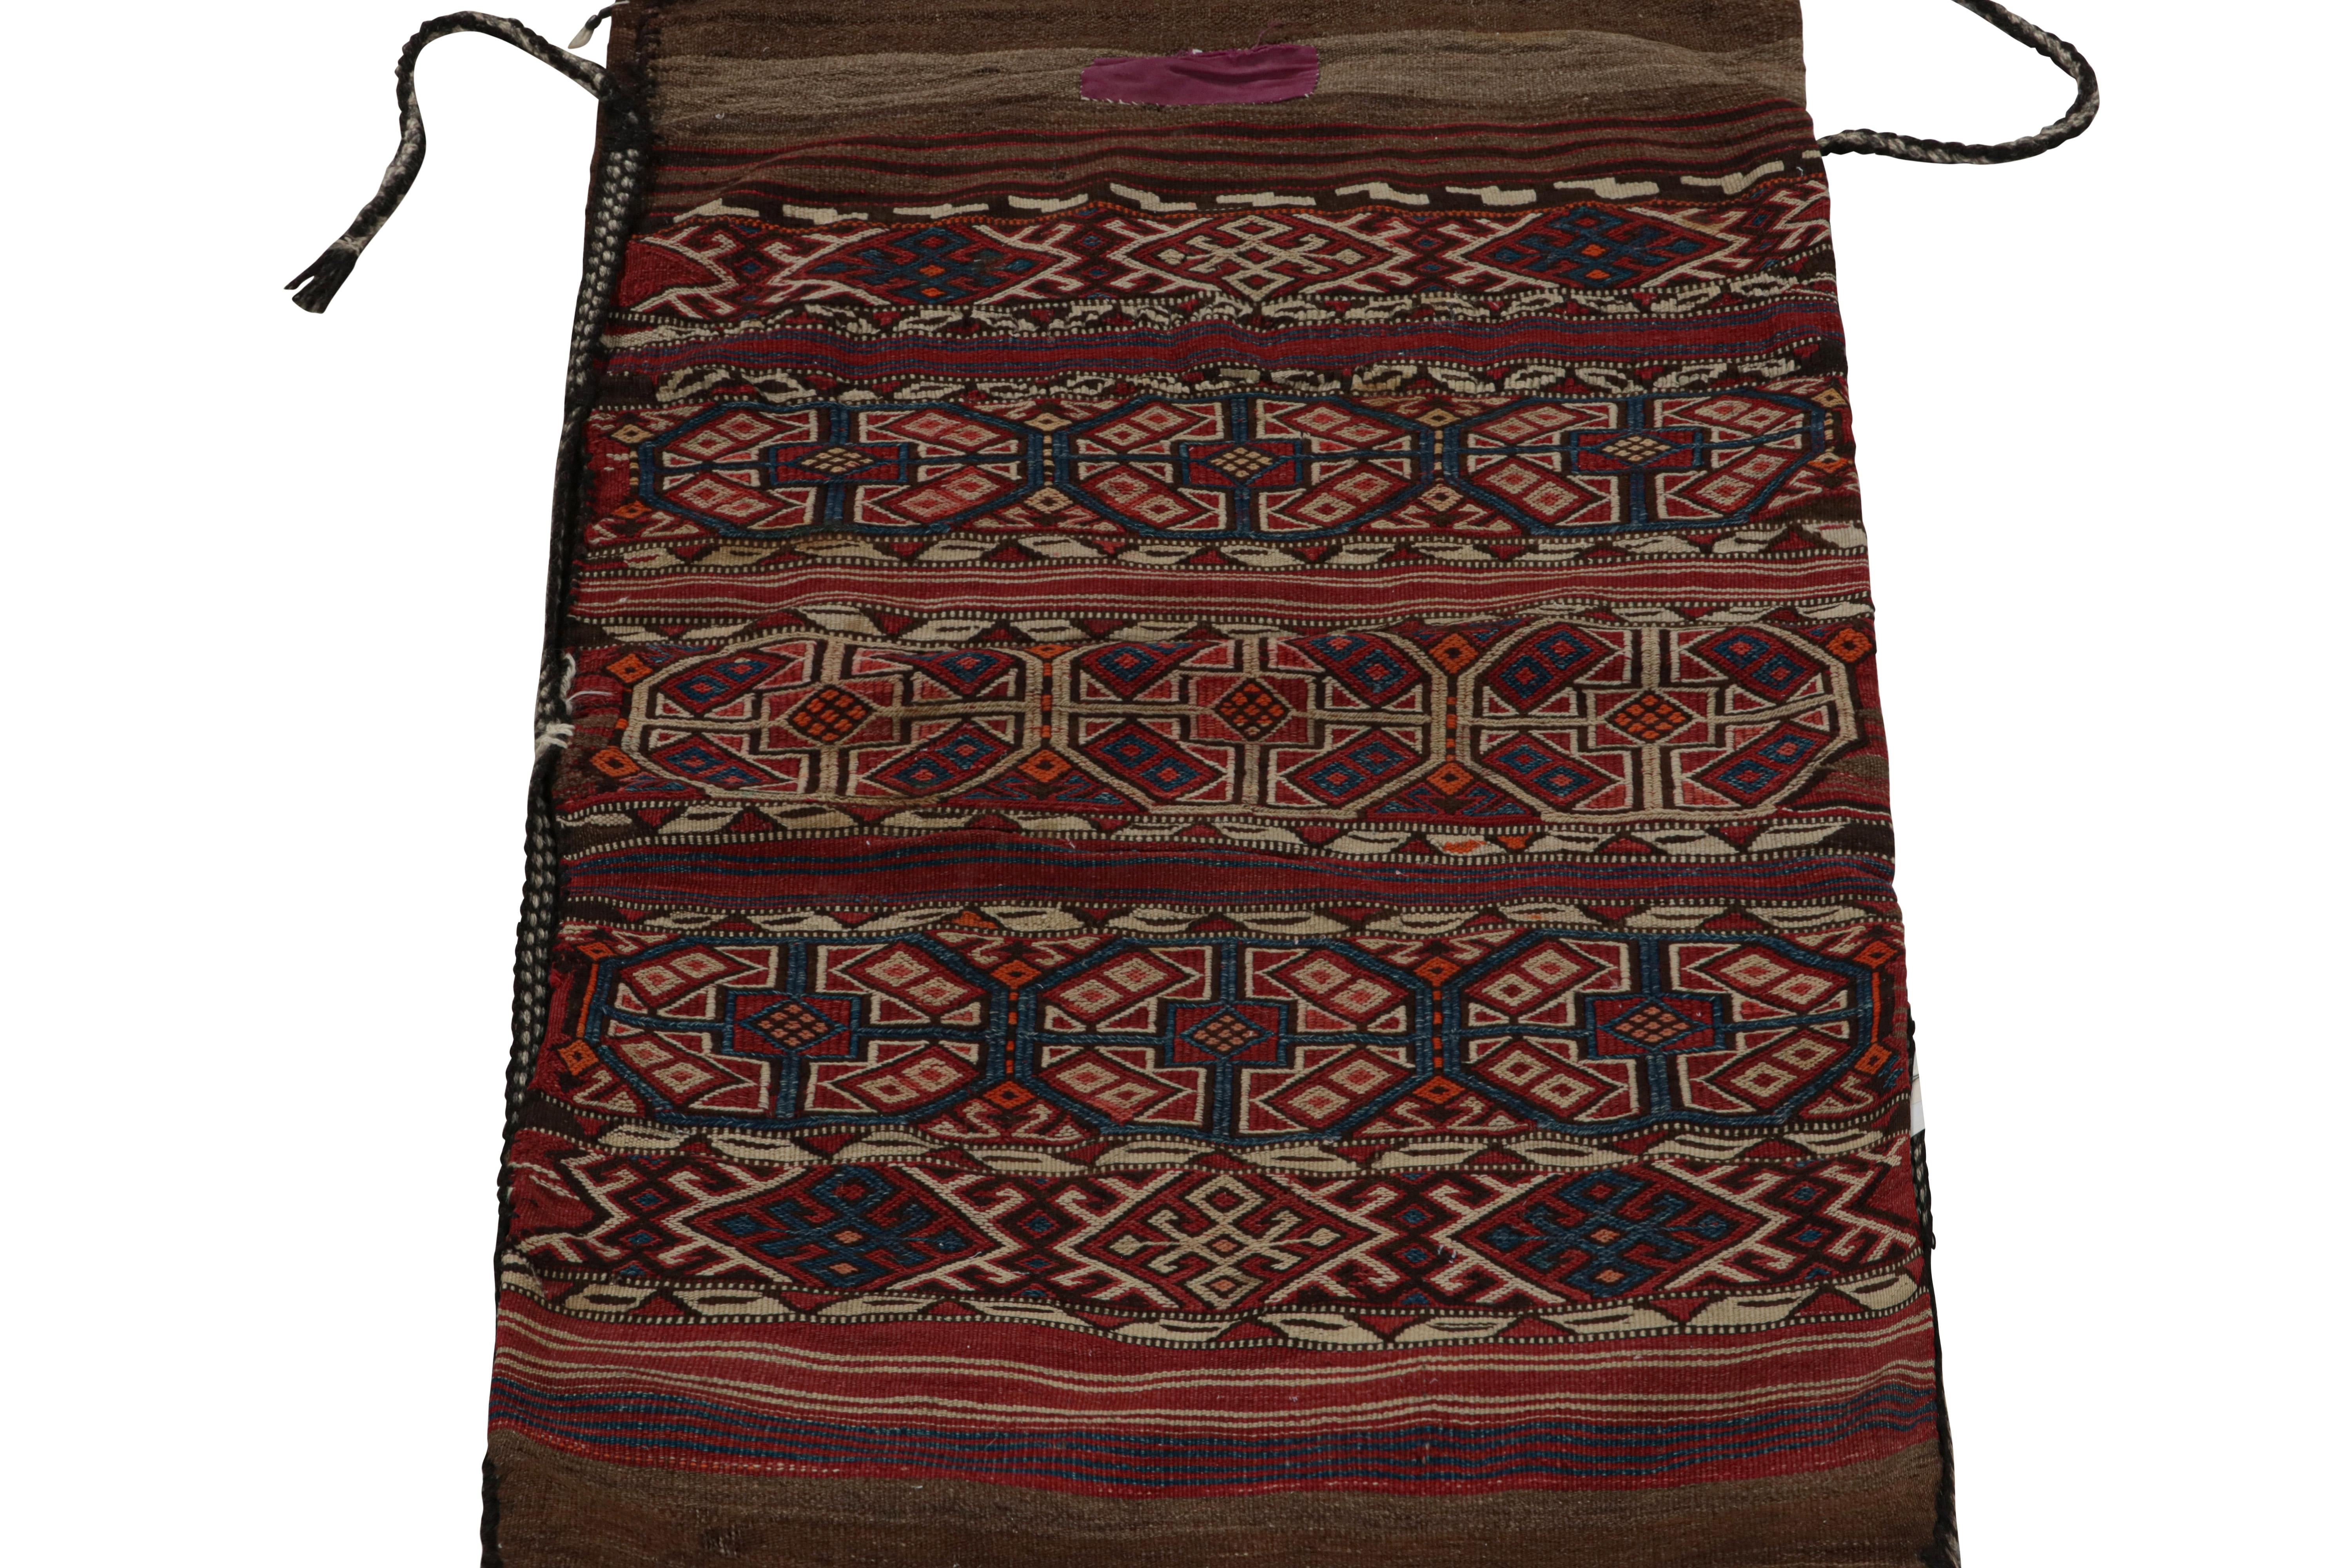 Turkish Antique Tribal Bag & Flatweave Textile with Geometric Patterns, from Rug & Kilim For Sale